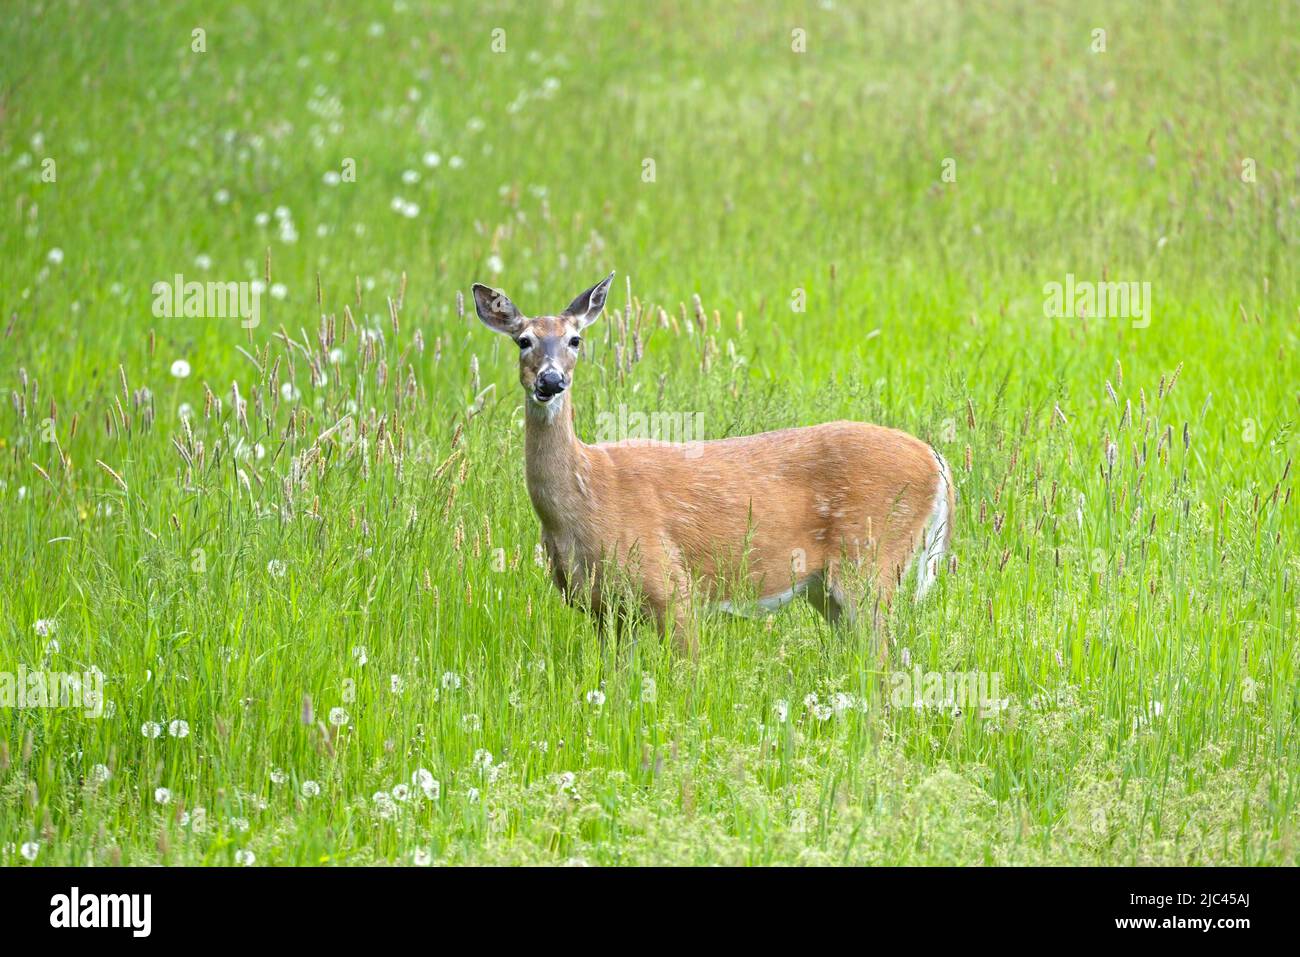 A white tail deer stands in a grassy field chewing on grass in eastern Washington. Stock Photo